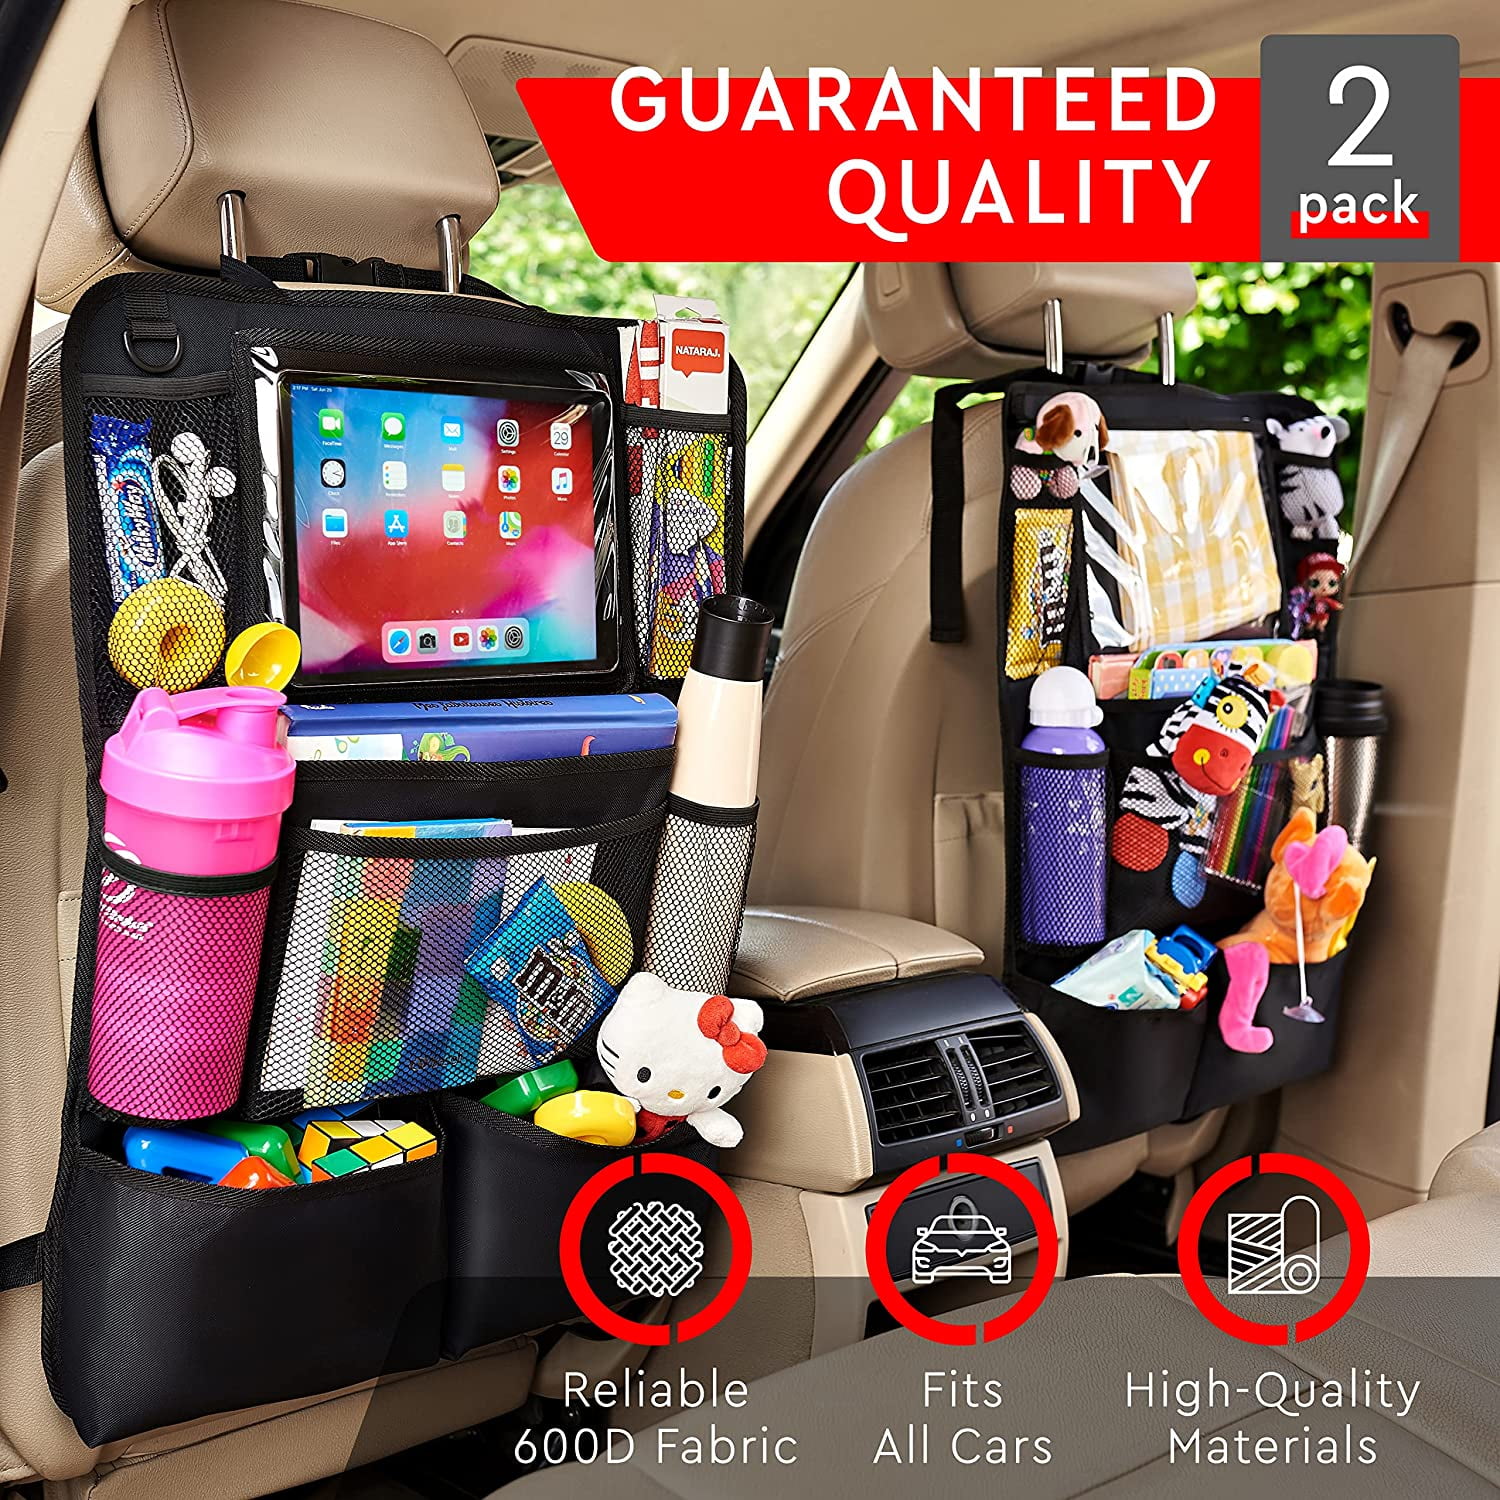 Kick Mats Back Seat Protector With Touch Screen Tablet Holder Car Travel Accessories,Black,2 Pack Yandong Sailor Moon Backseat Car Organizer 4 Storage Pockets For Kids Toddlers 